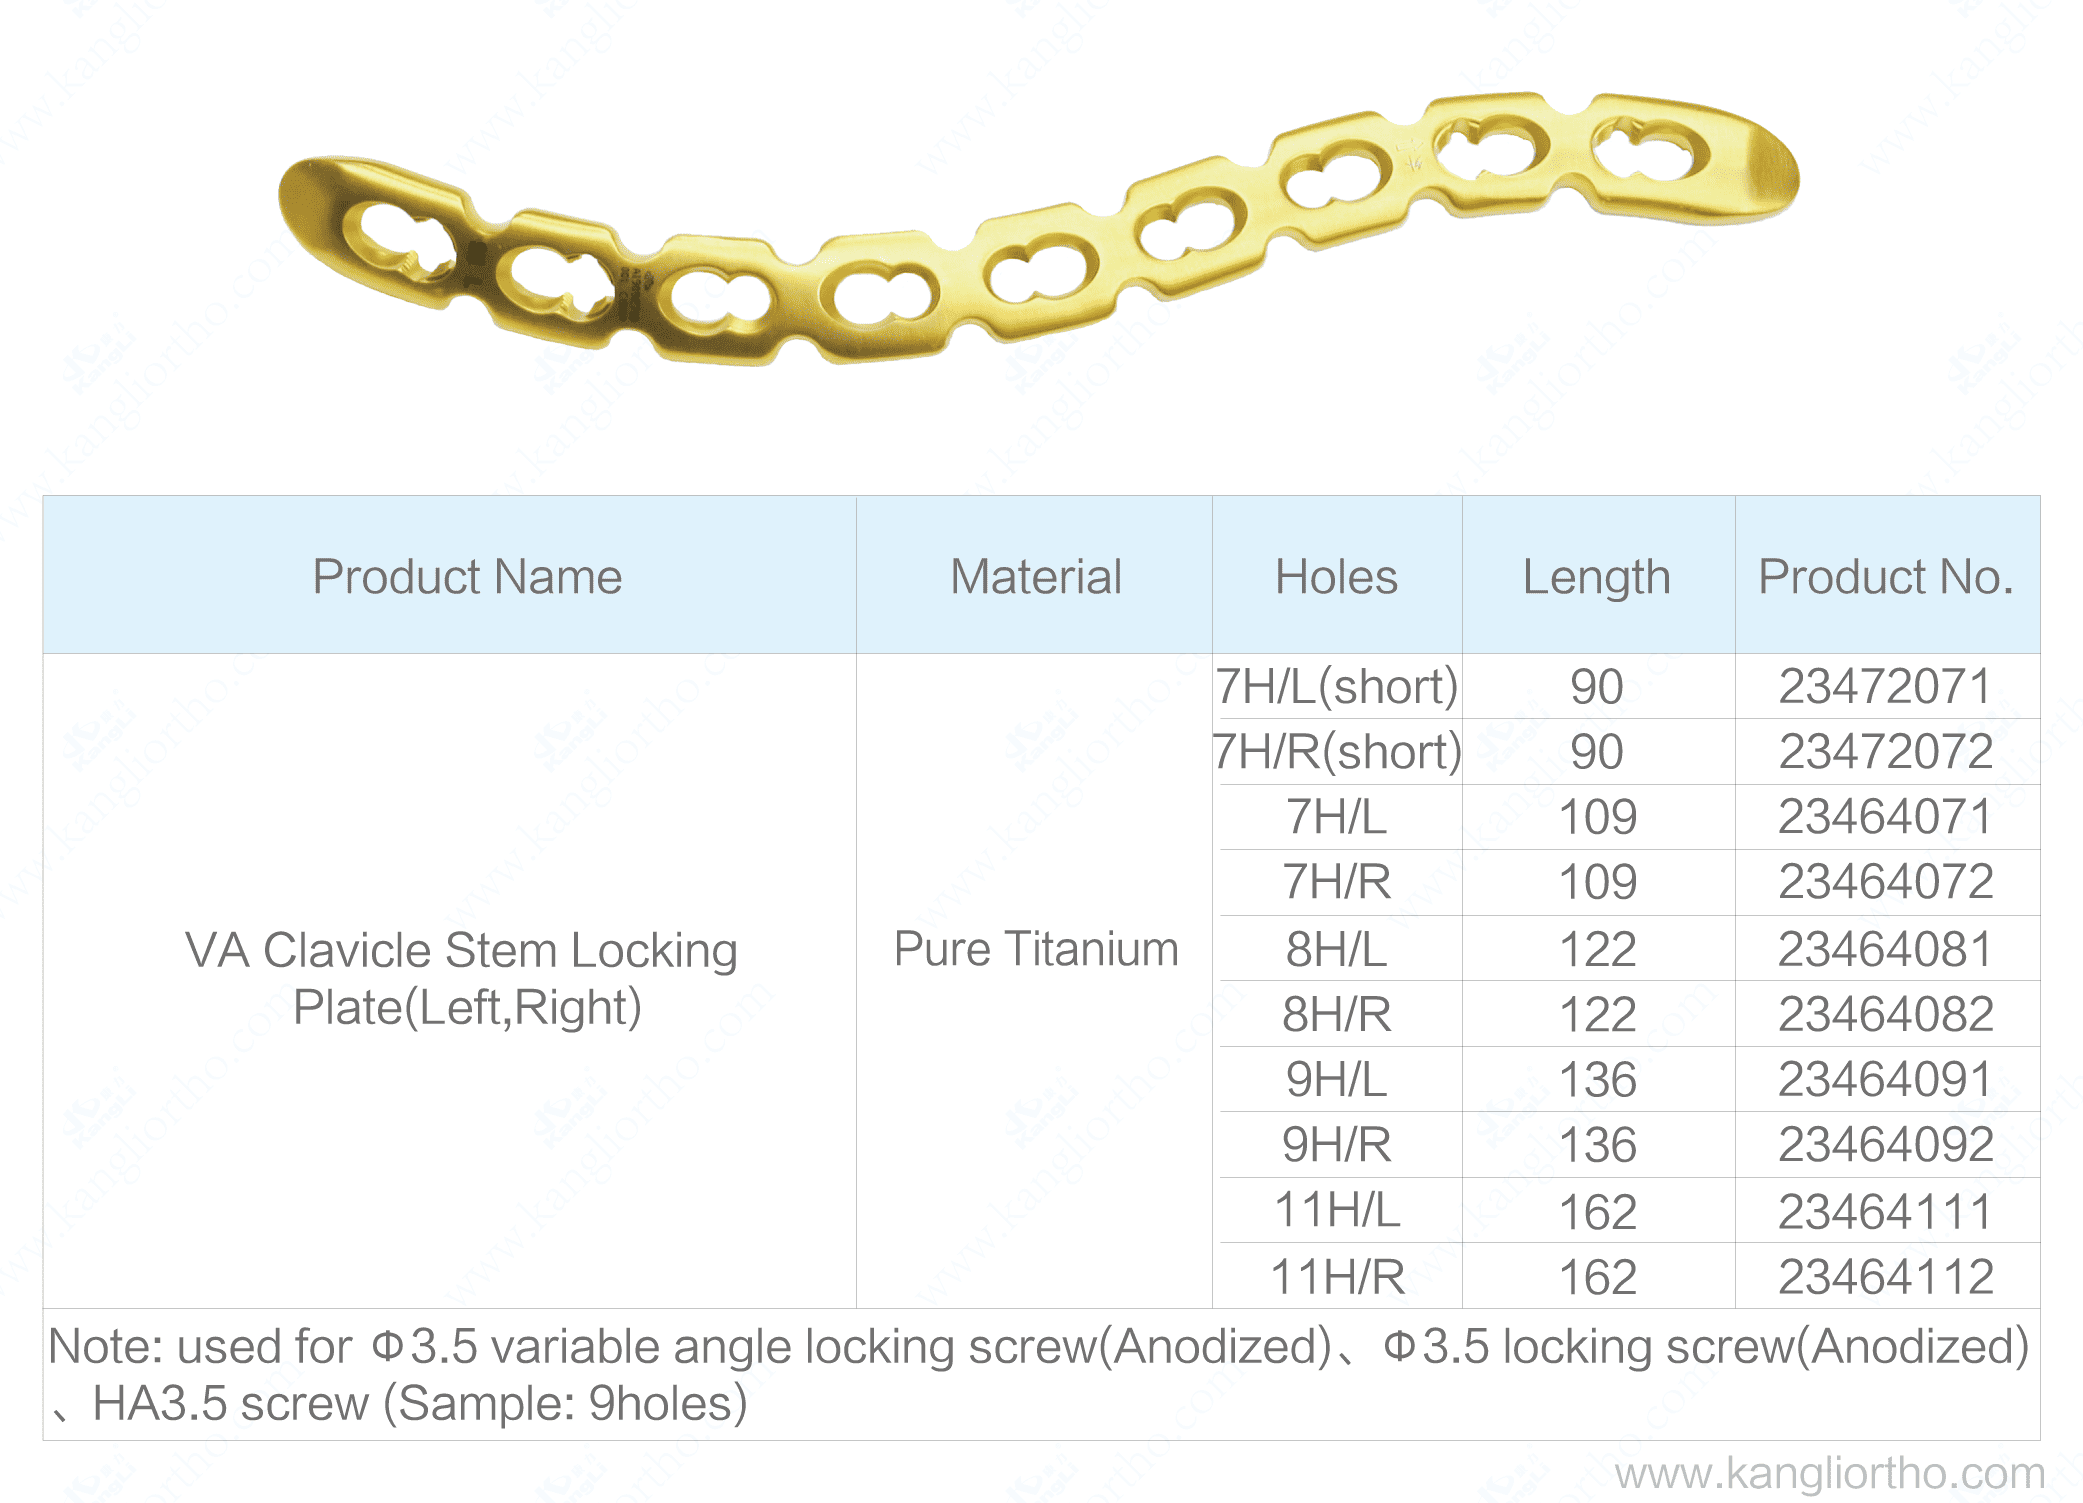 va-clavicle-stem-locking-plate-specifications